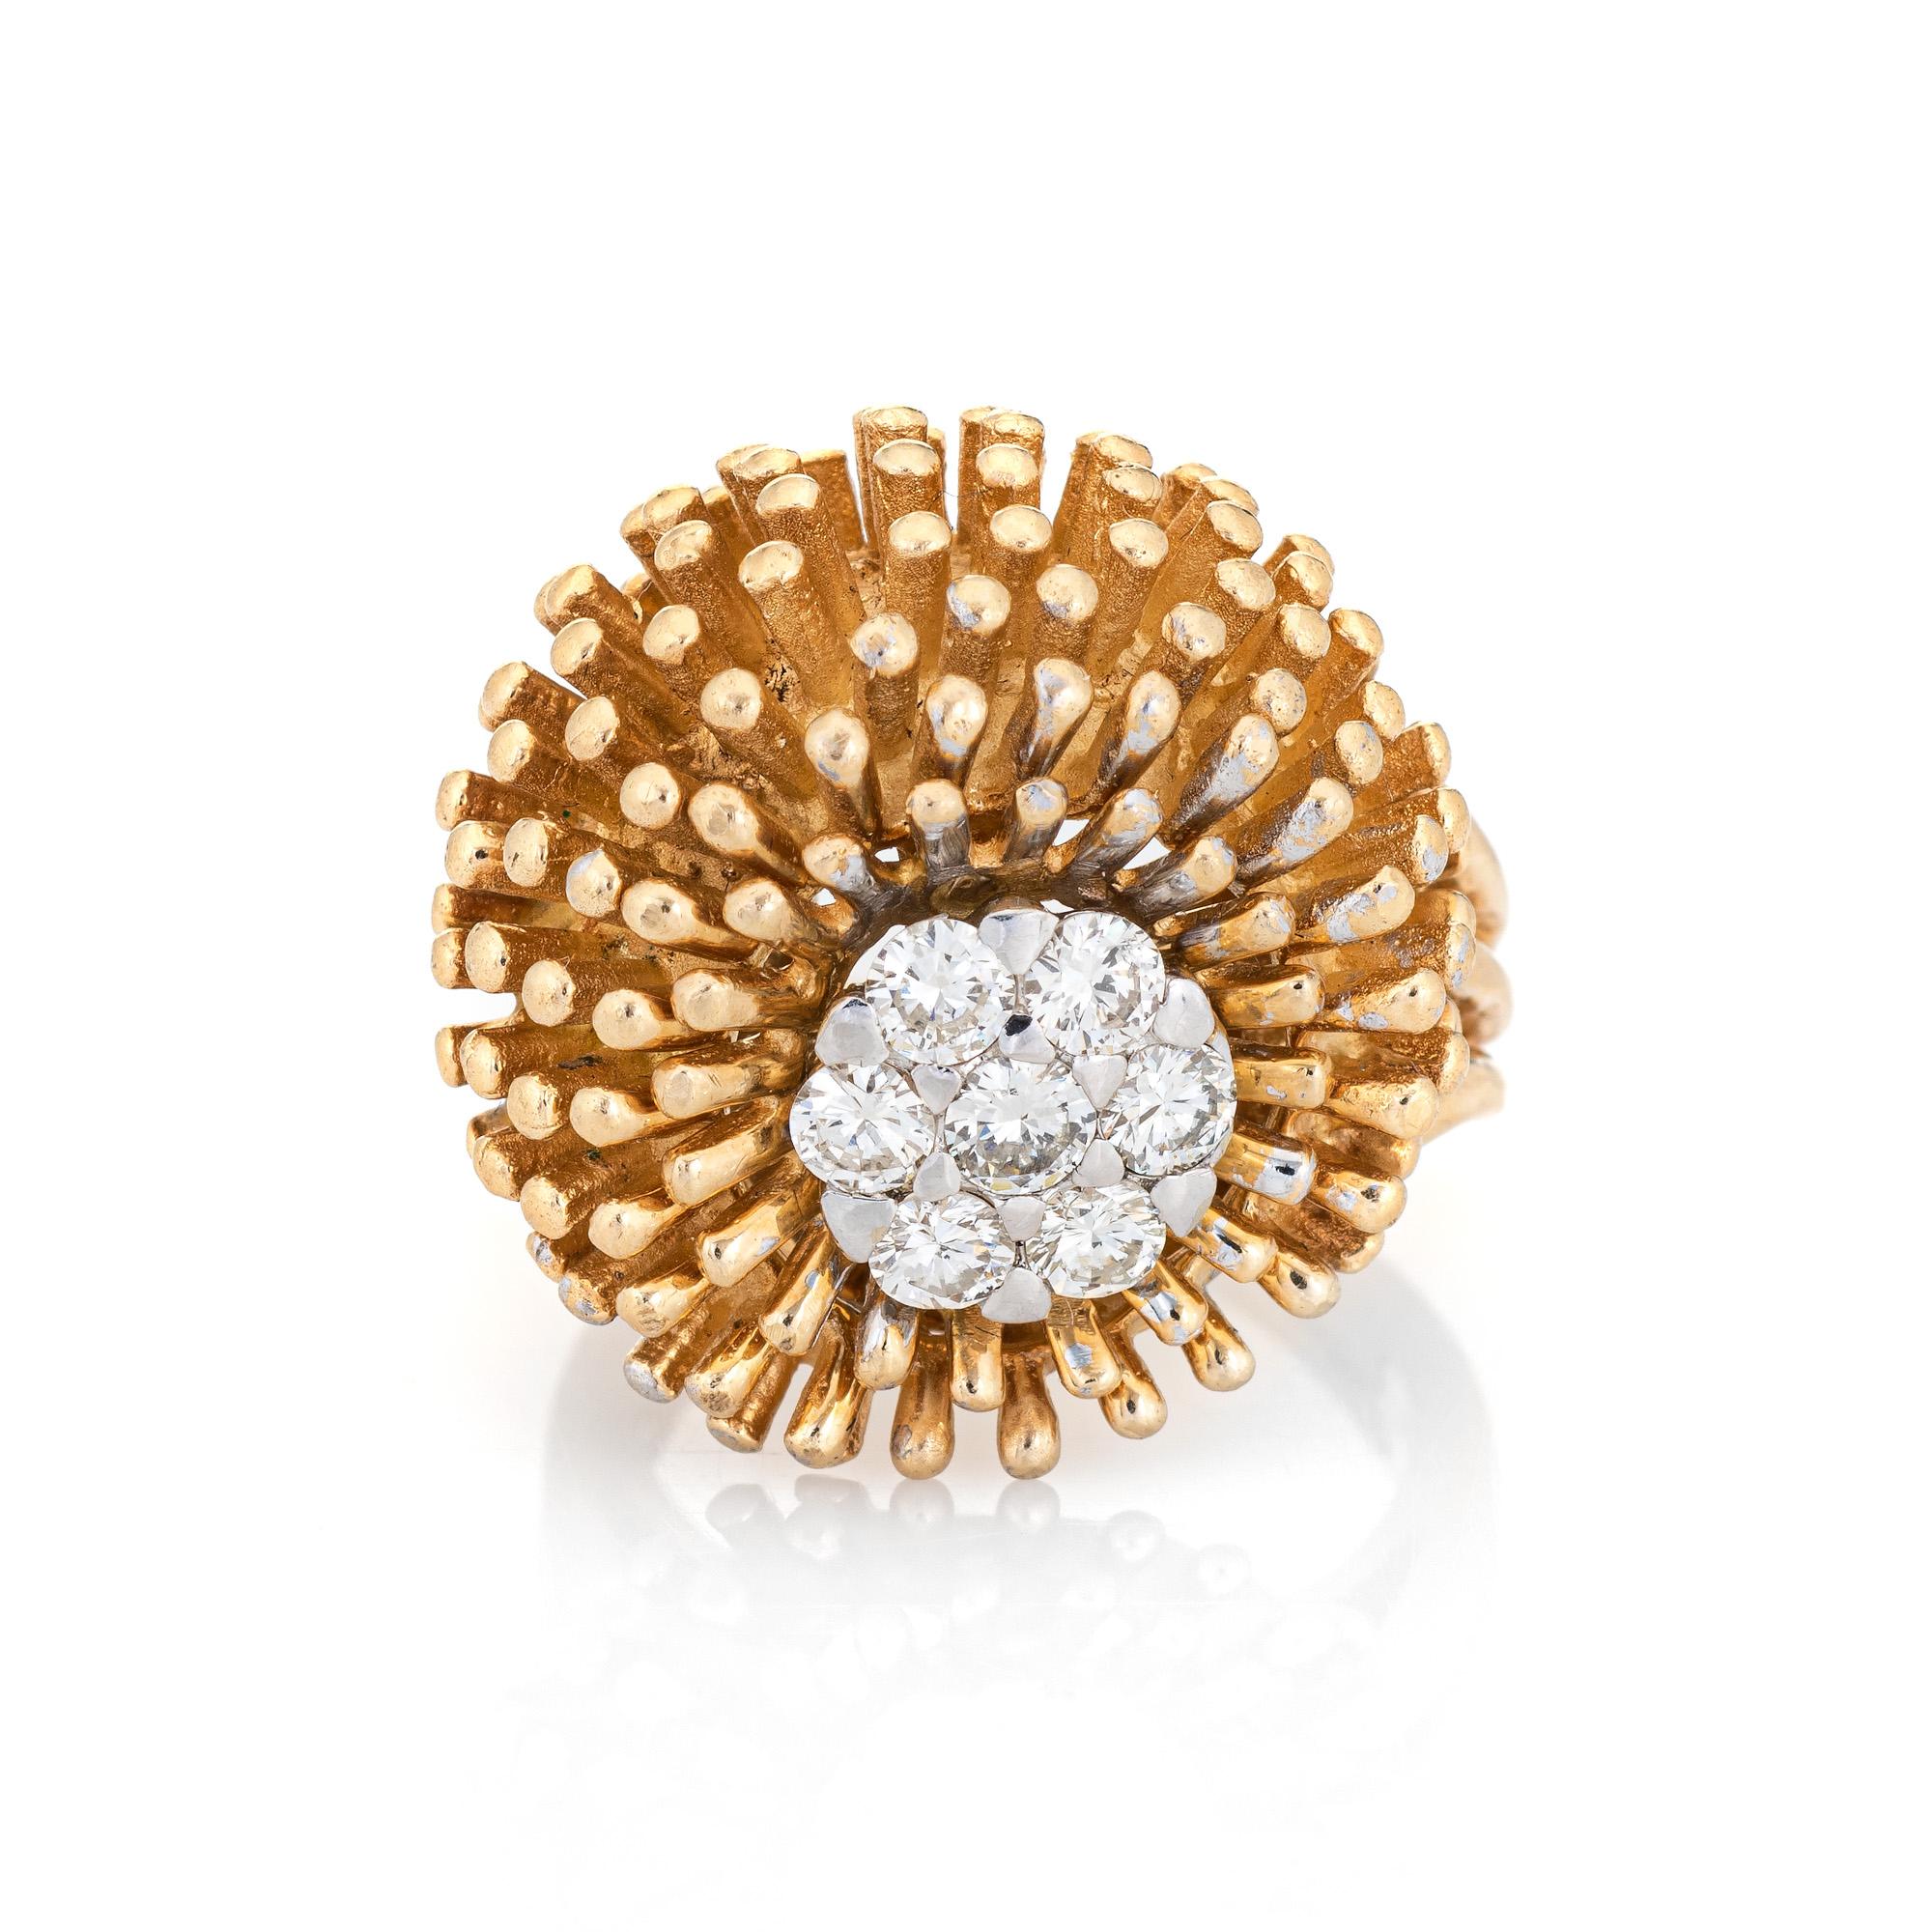 Stylish vintage sea urchin diamond ring crafted in 14 karat yellow gold. 

7 round brilliant cut diamonds total an estimated 0.56 carats (estimated at H-I color and VS2-SI1 clarity). 

The distinct ring is set with shimmering diamonds into the sea